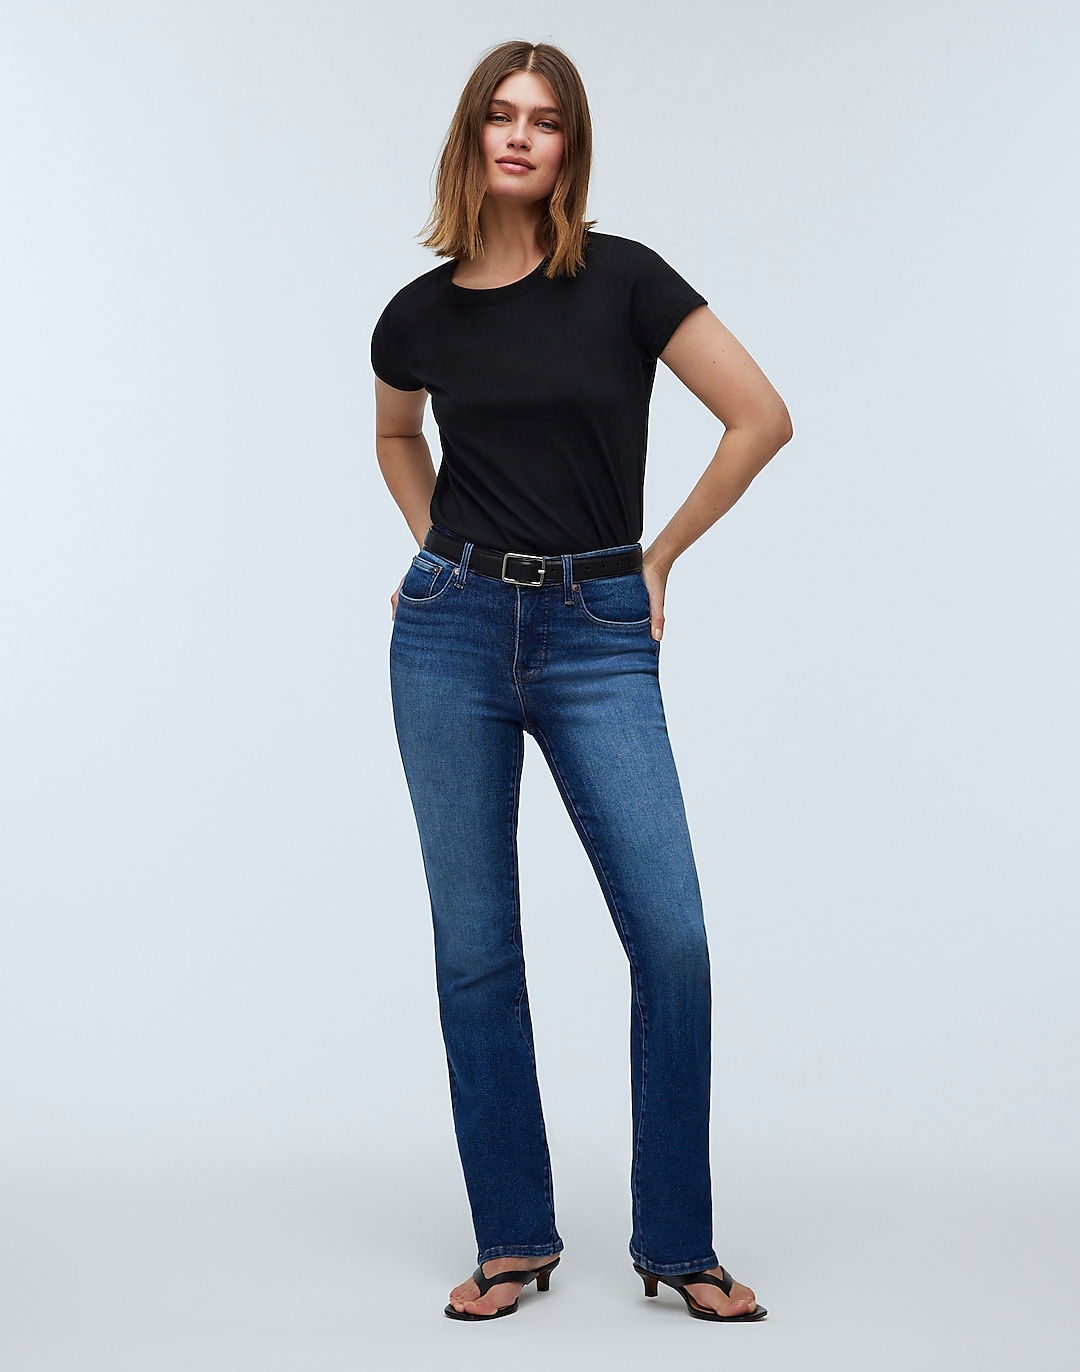 Kick Out Full-Length Jeans | Madewell